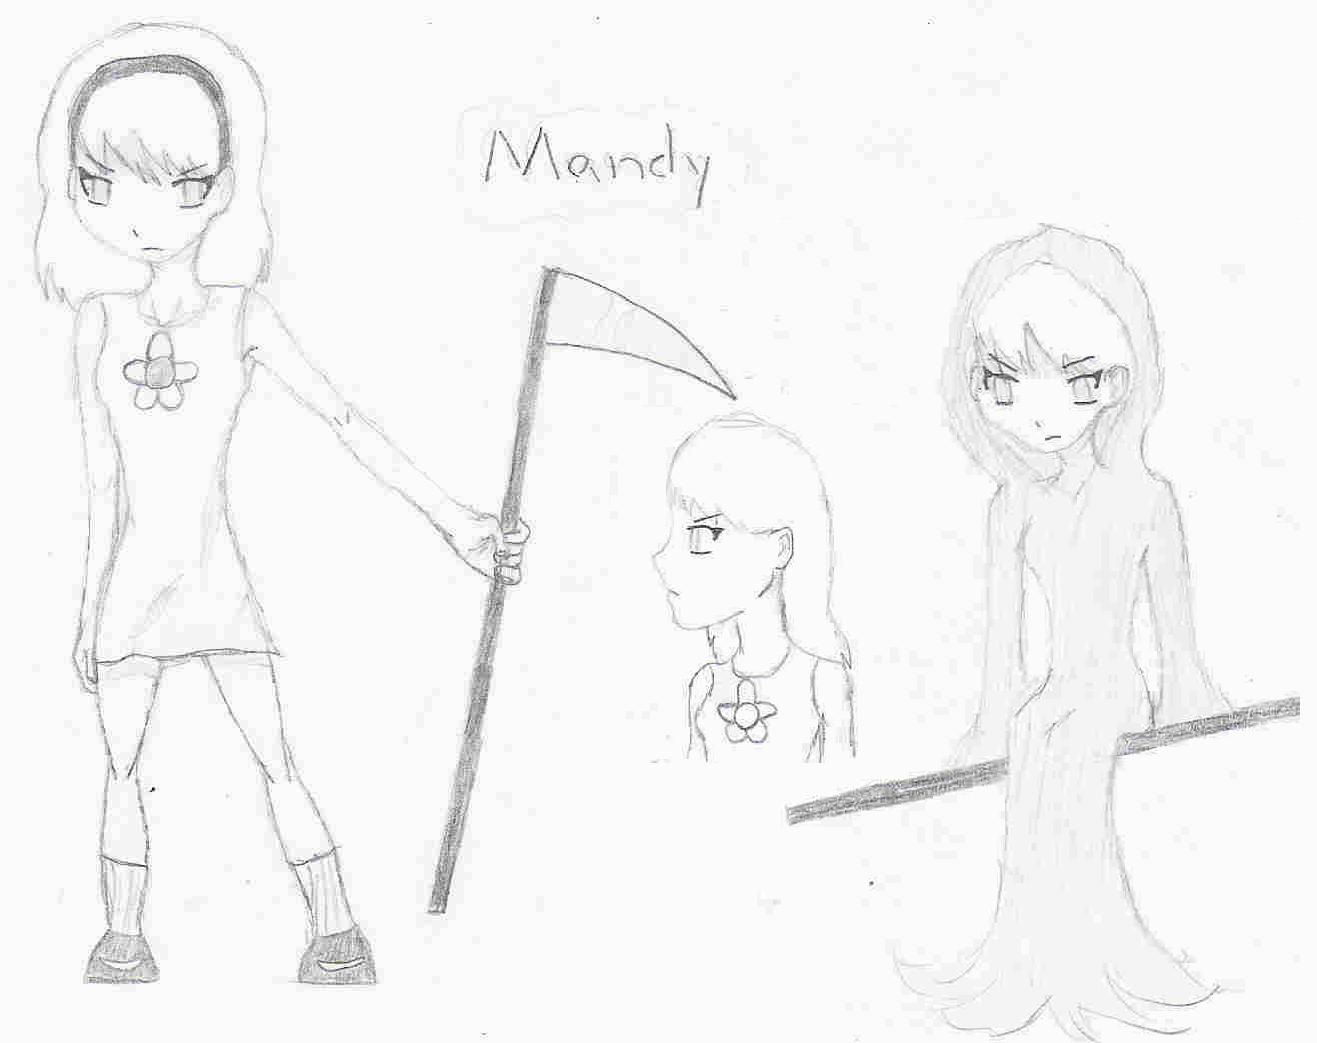 Mandy sketches by Hieis_lover_and_obsessor